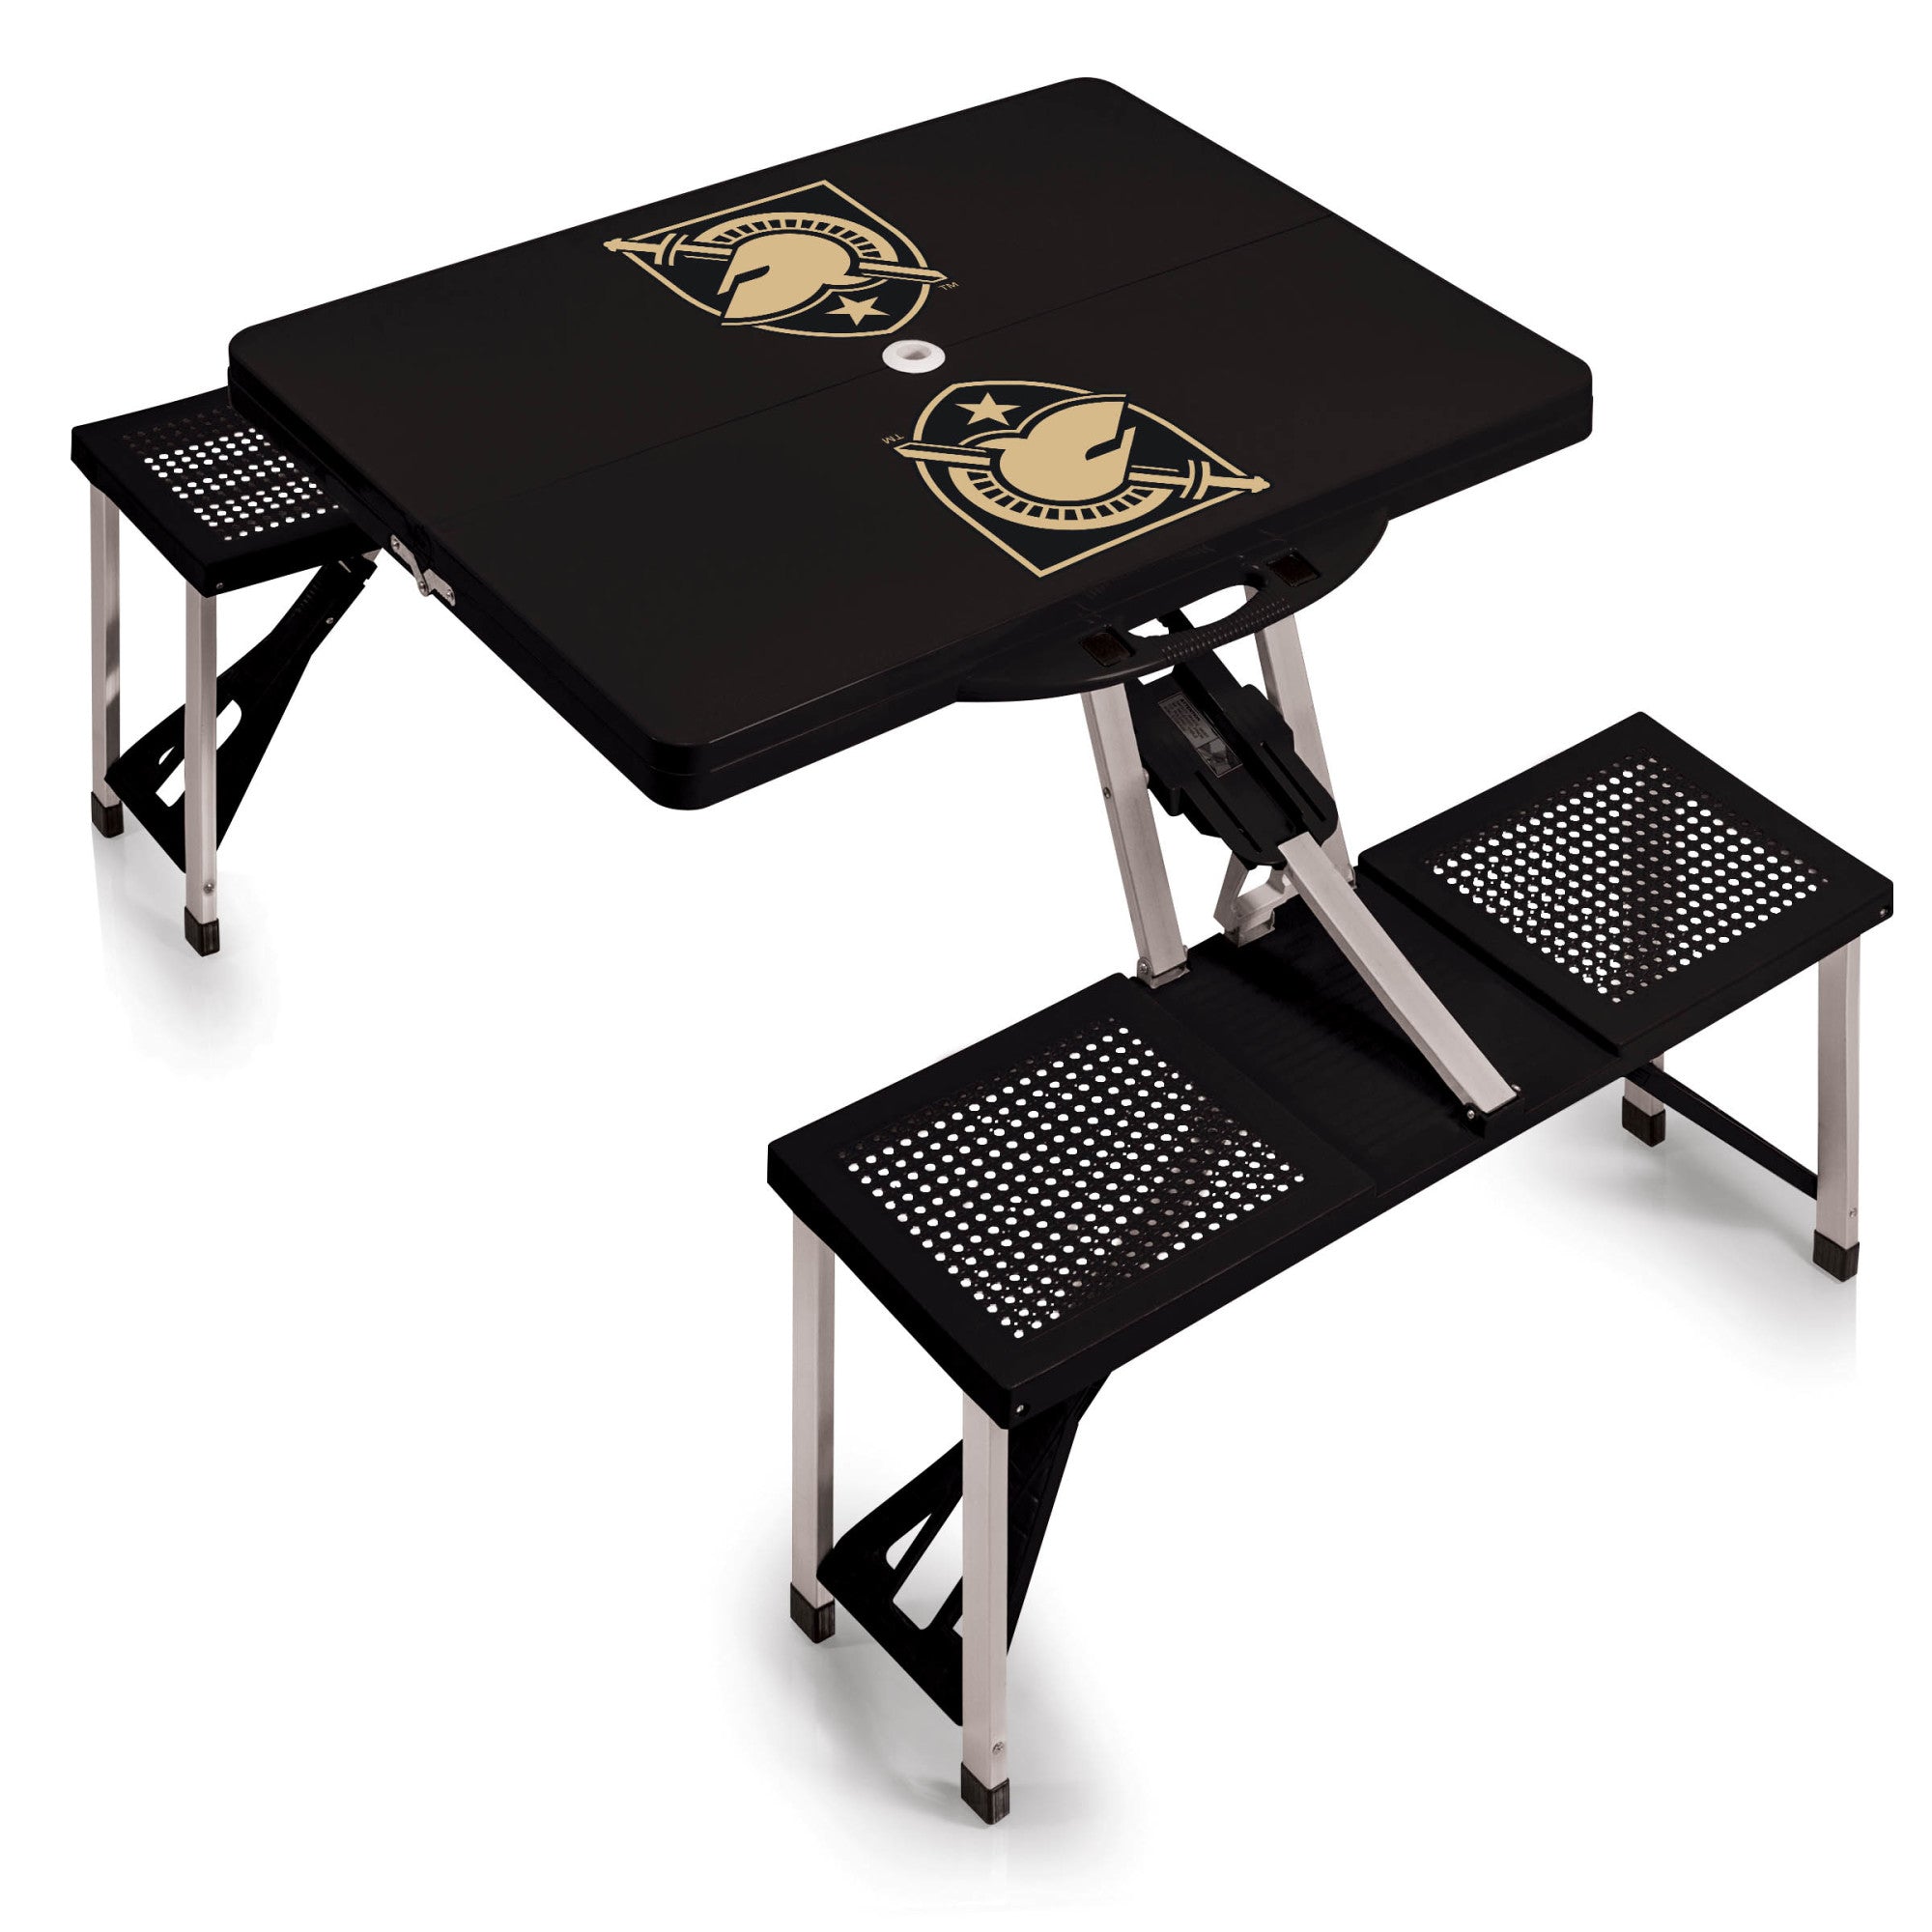 Army Black Knights - Picnic Table Portable Folding Table with Seats